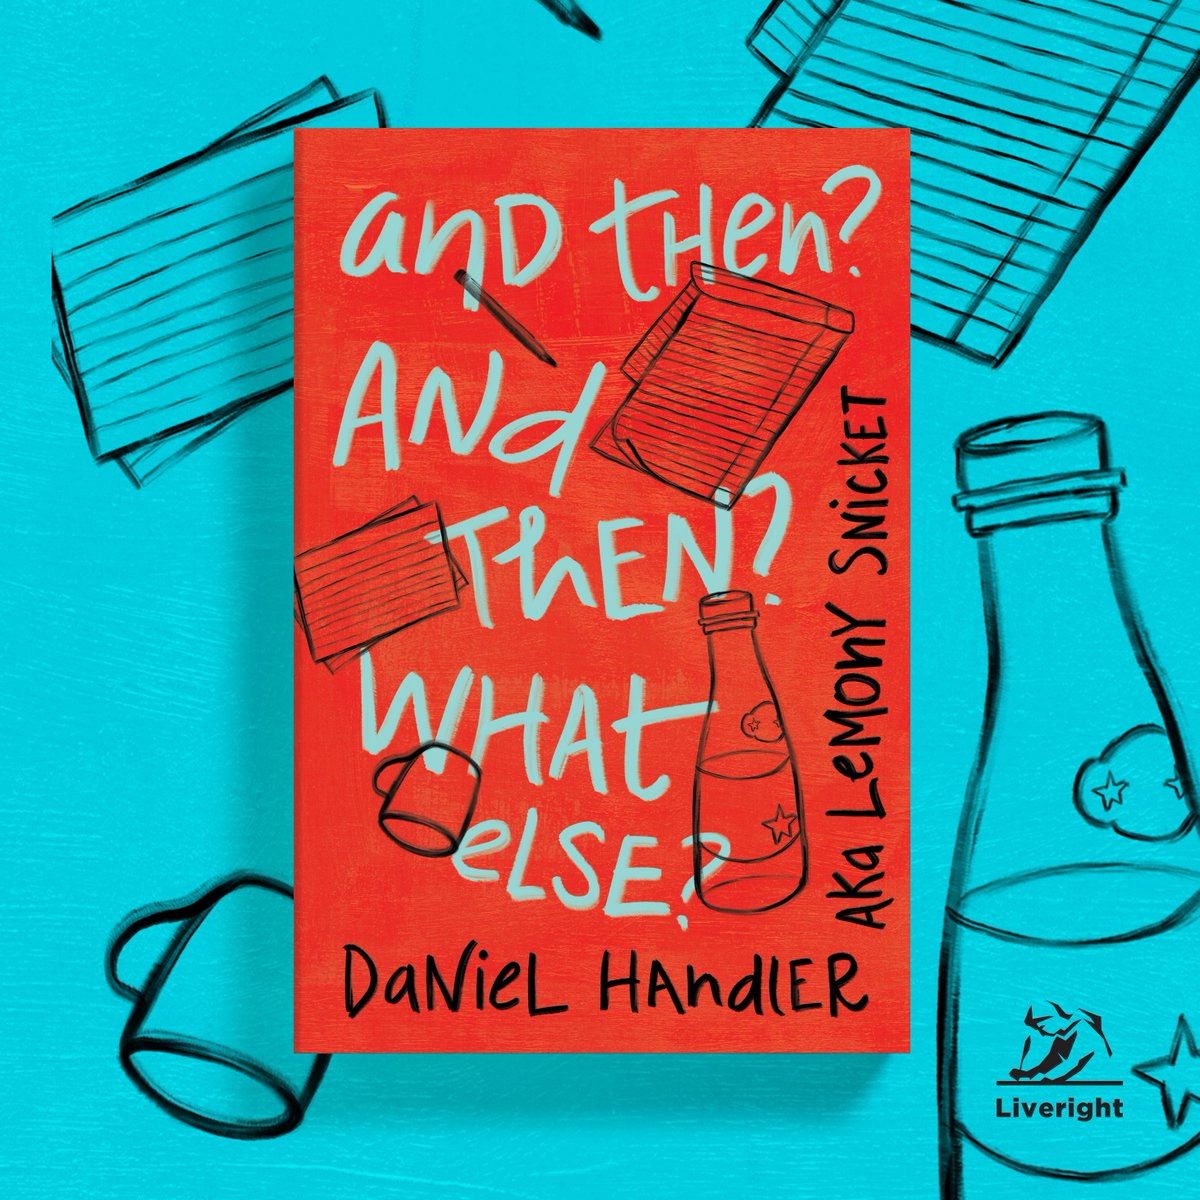 Happy AND THEN? AND THEN? WHAT ELSE? day to @DanielHandler, aka Lemony Snicket! “Why not opt for joy? This, Handler wants us to understand, is the most important component of storytelling... and of living too.” —@davidulin, @latimesbooks Get it! wwnorton.com/books/97813240…